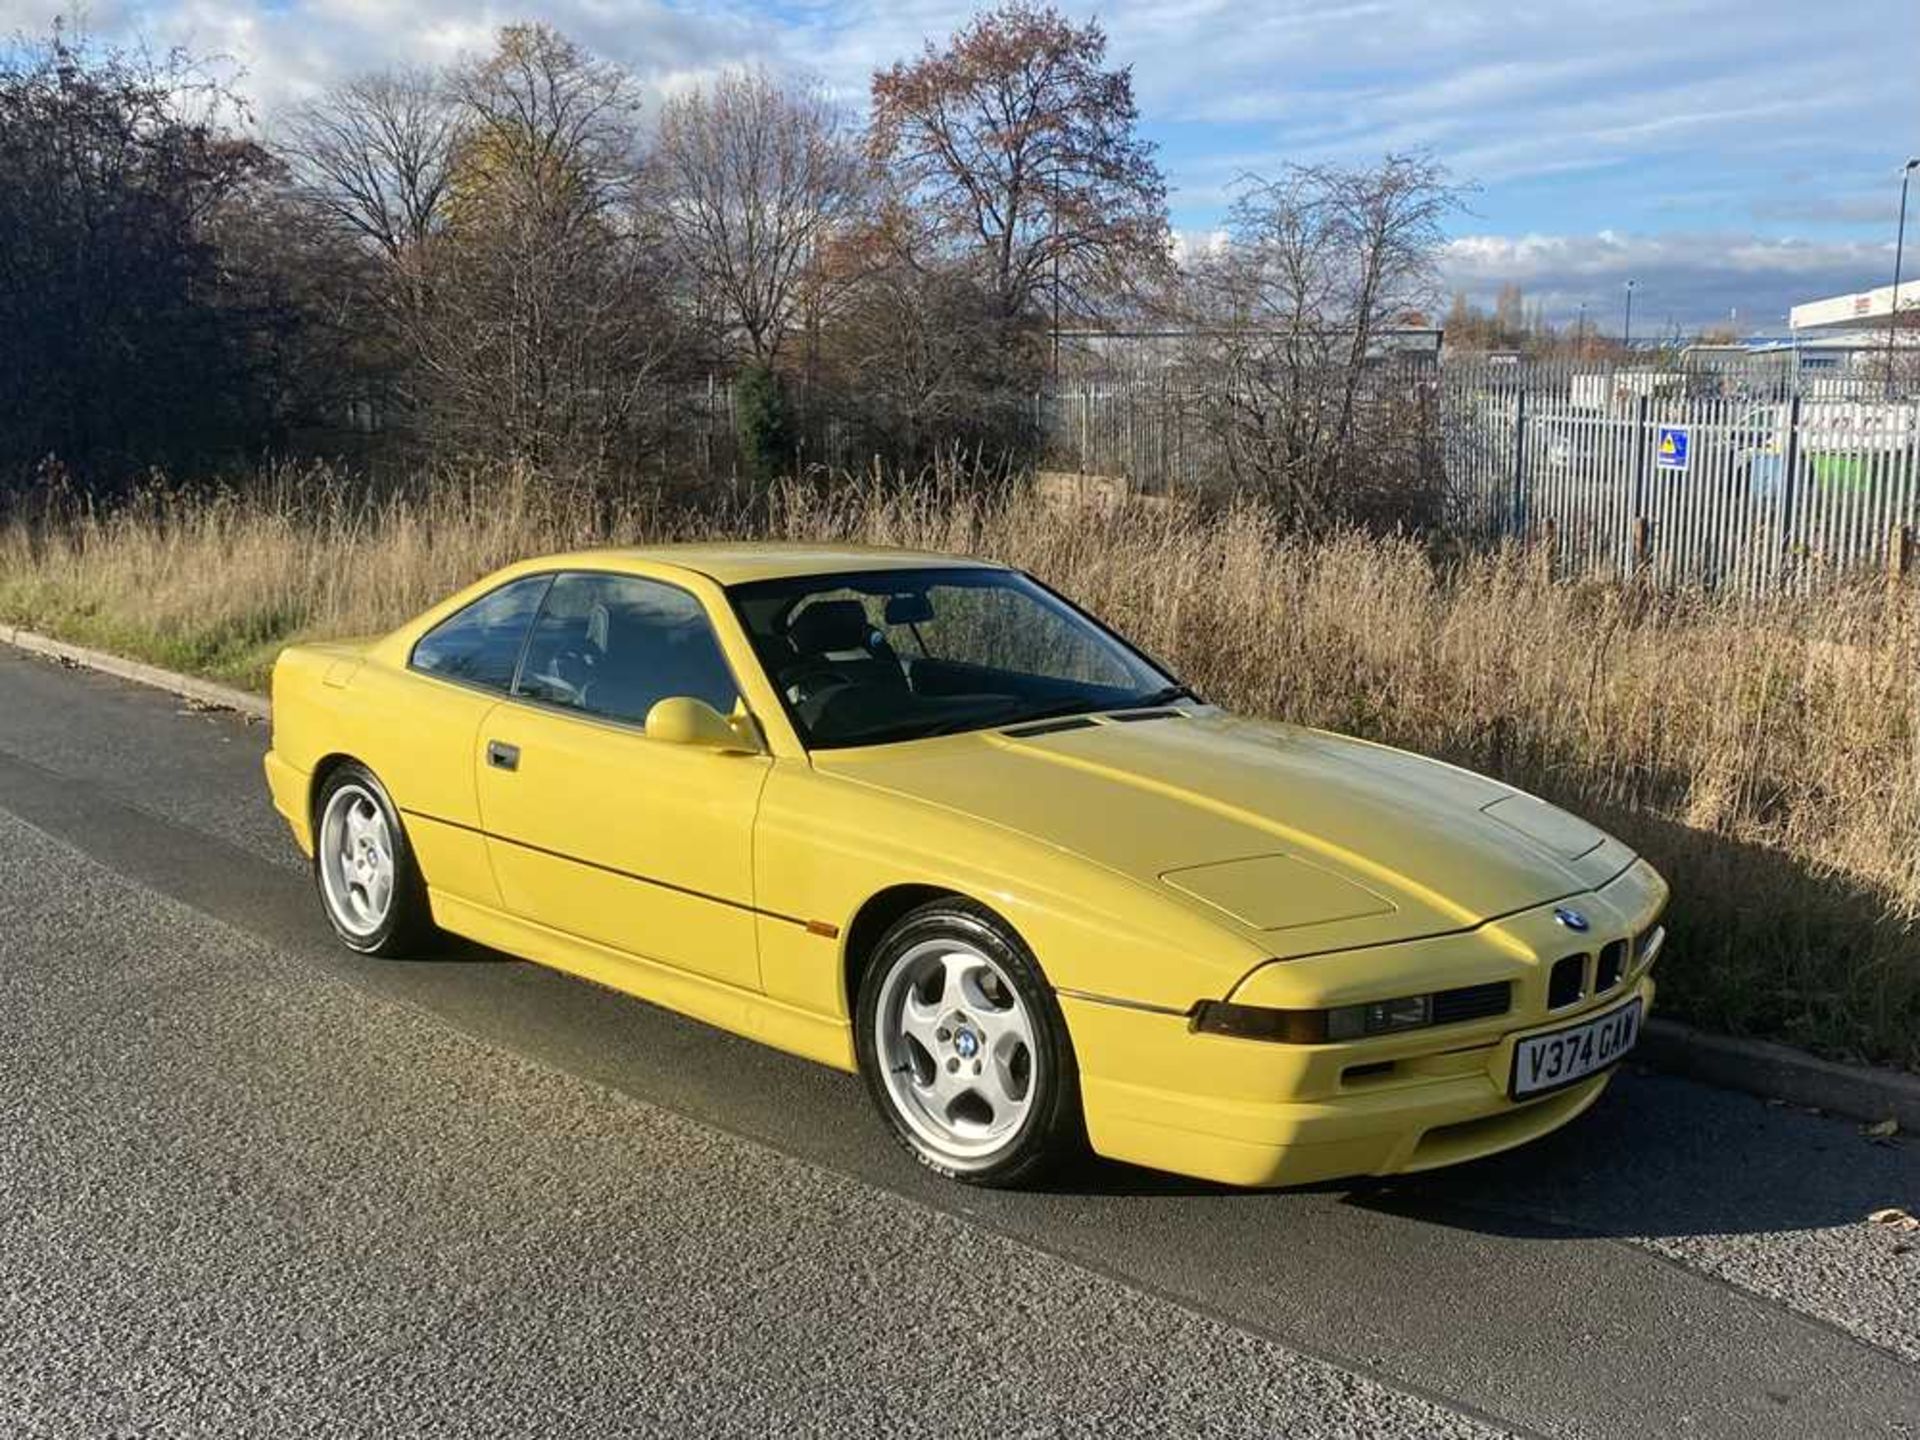 1997 BMW 840 CI Sport Understood to be 1 of just 38 finished in Dakar Yellow II - Image 74 of 79